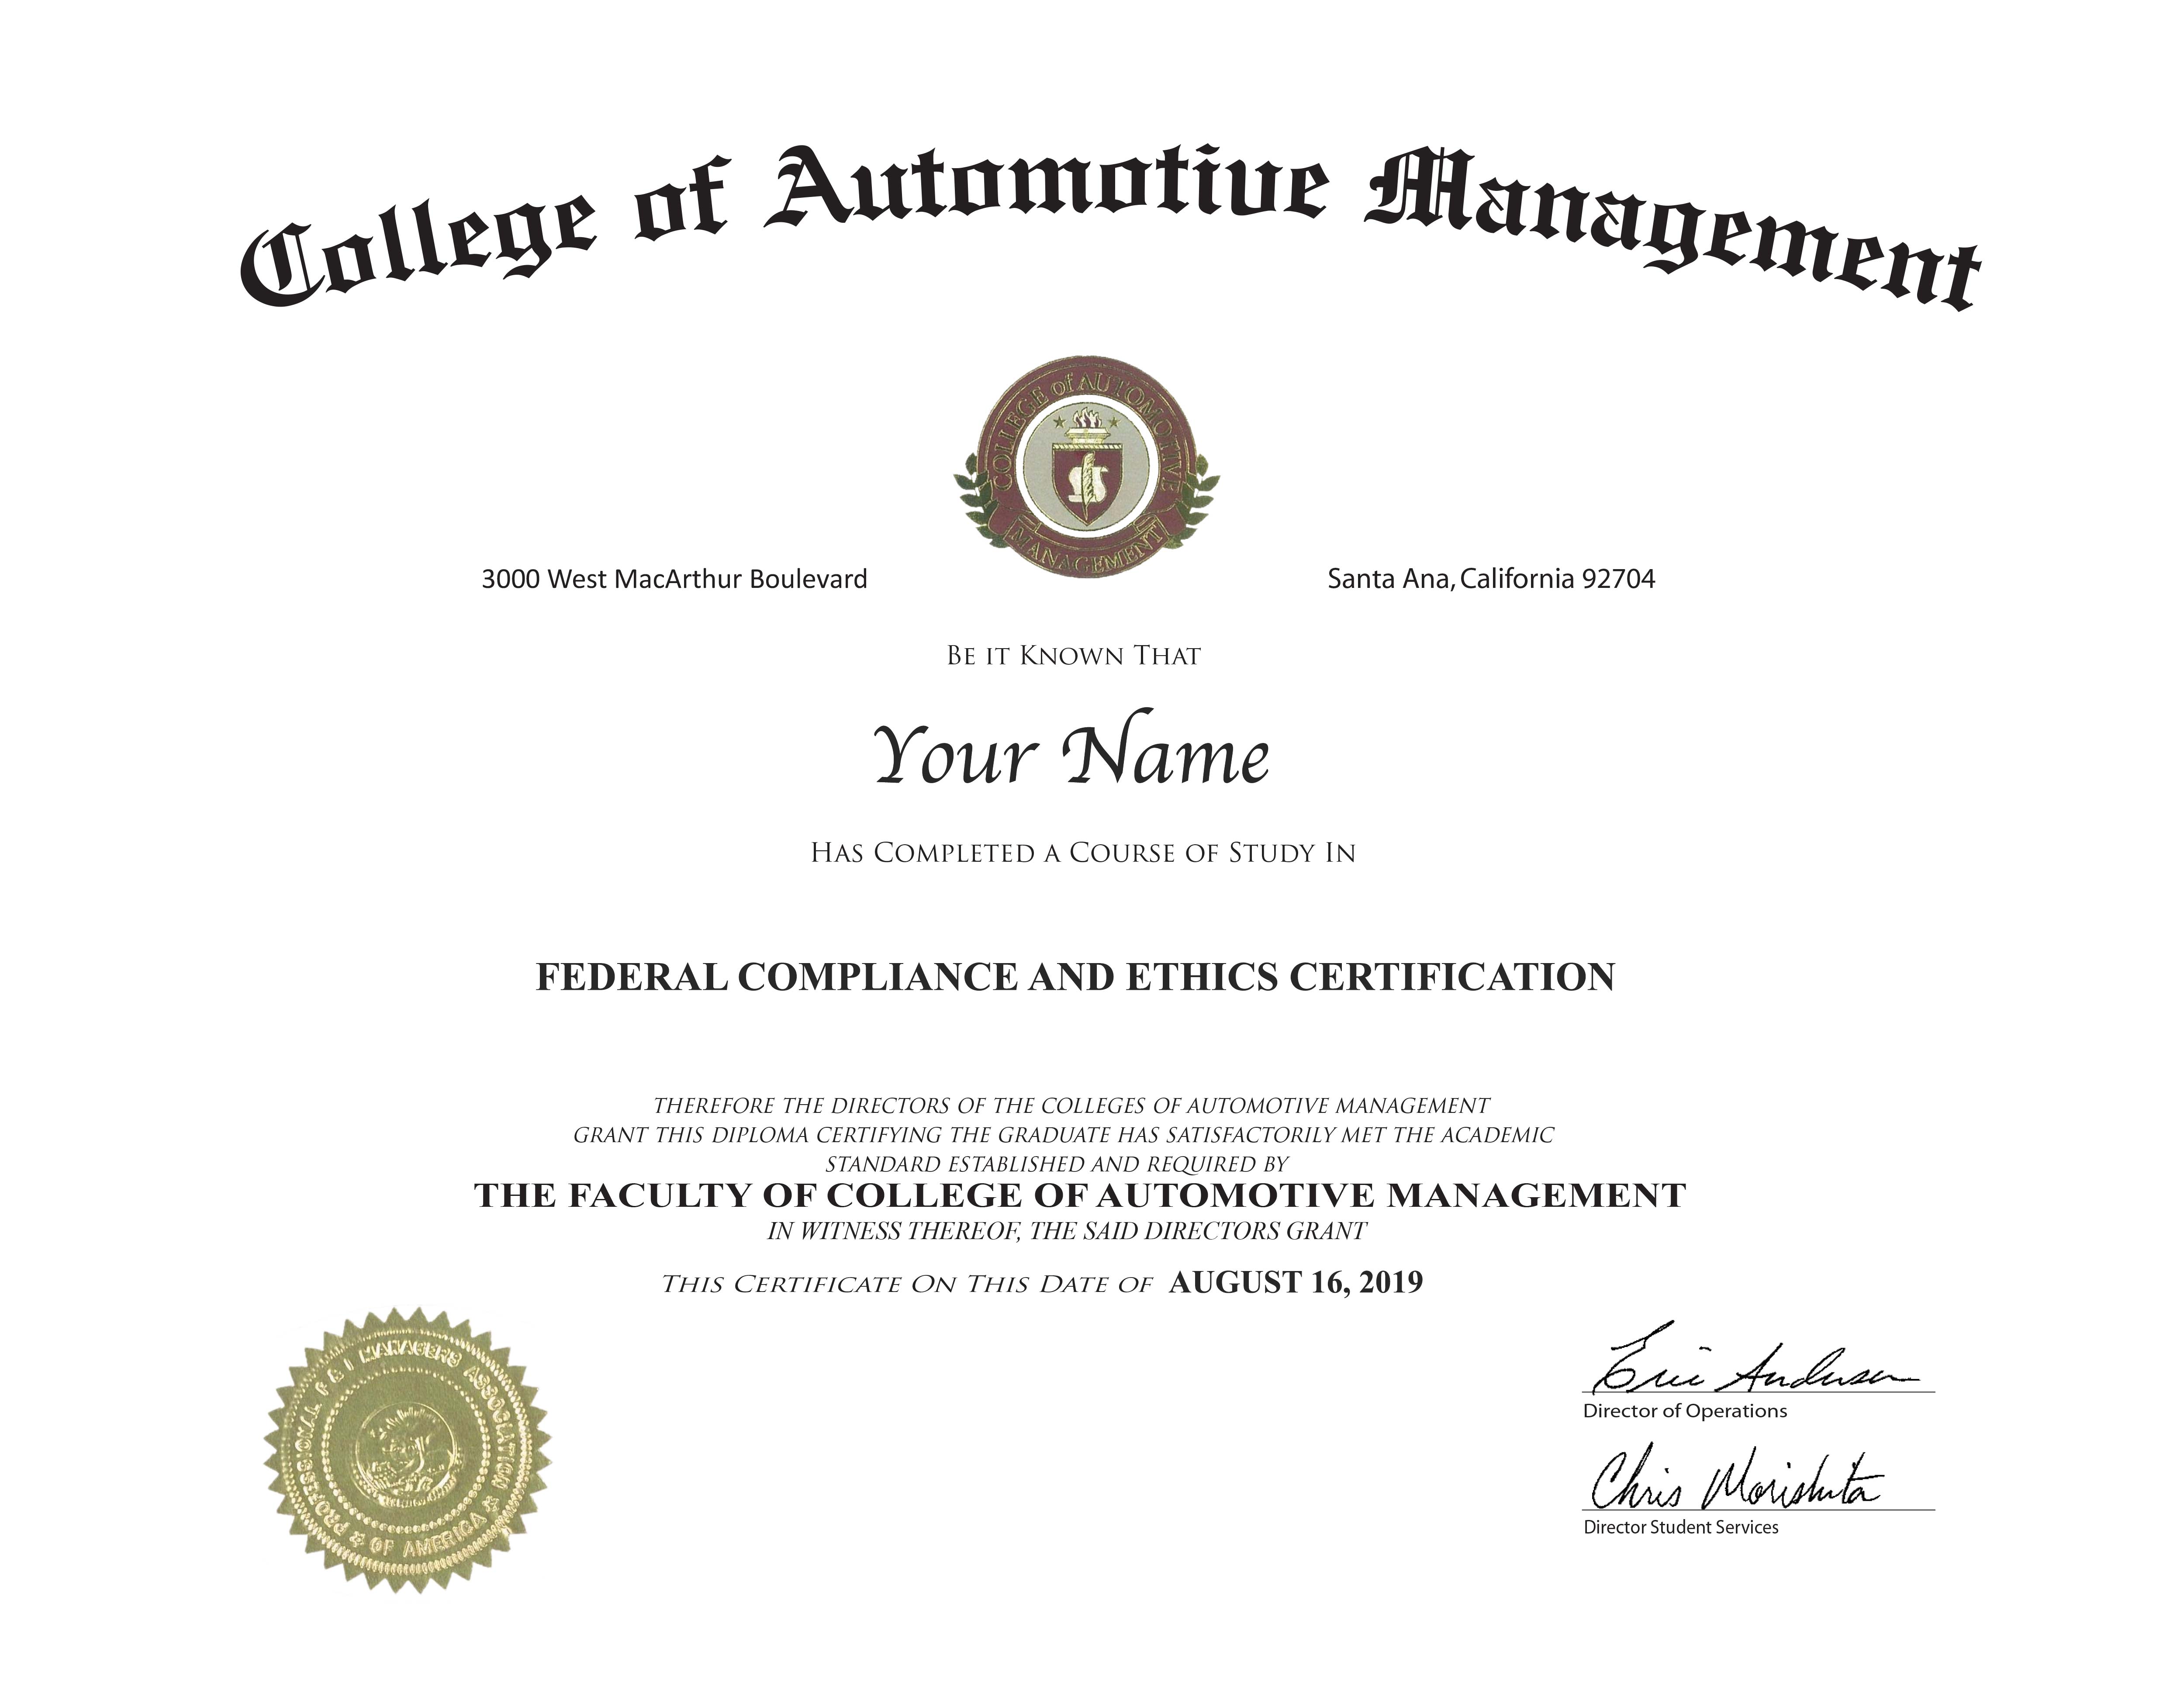 Federal Compliance and Ethics Certification - certificate